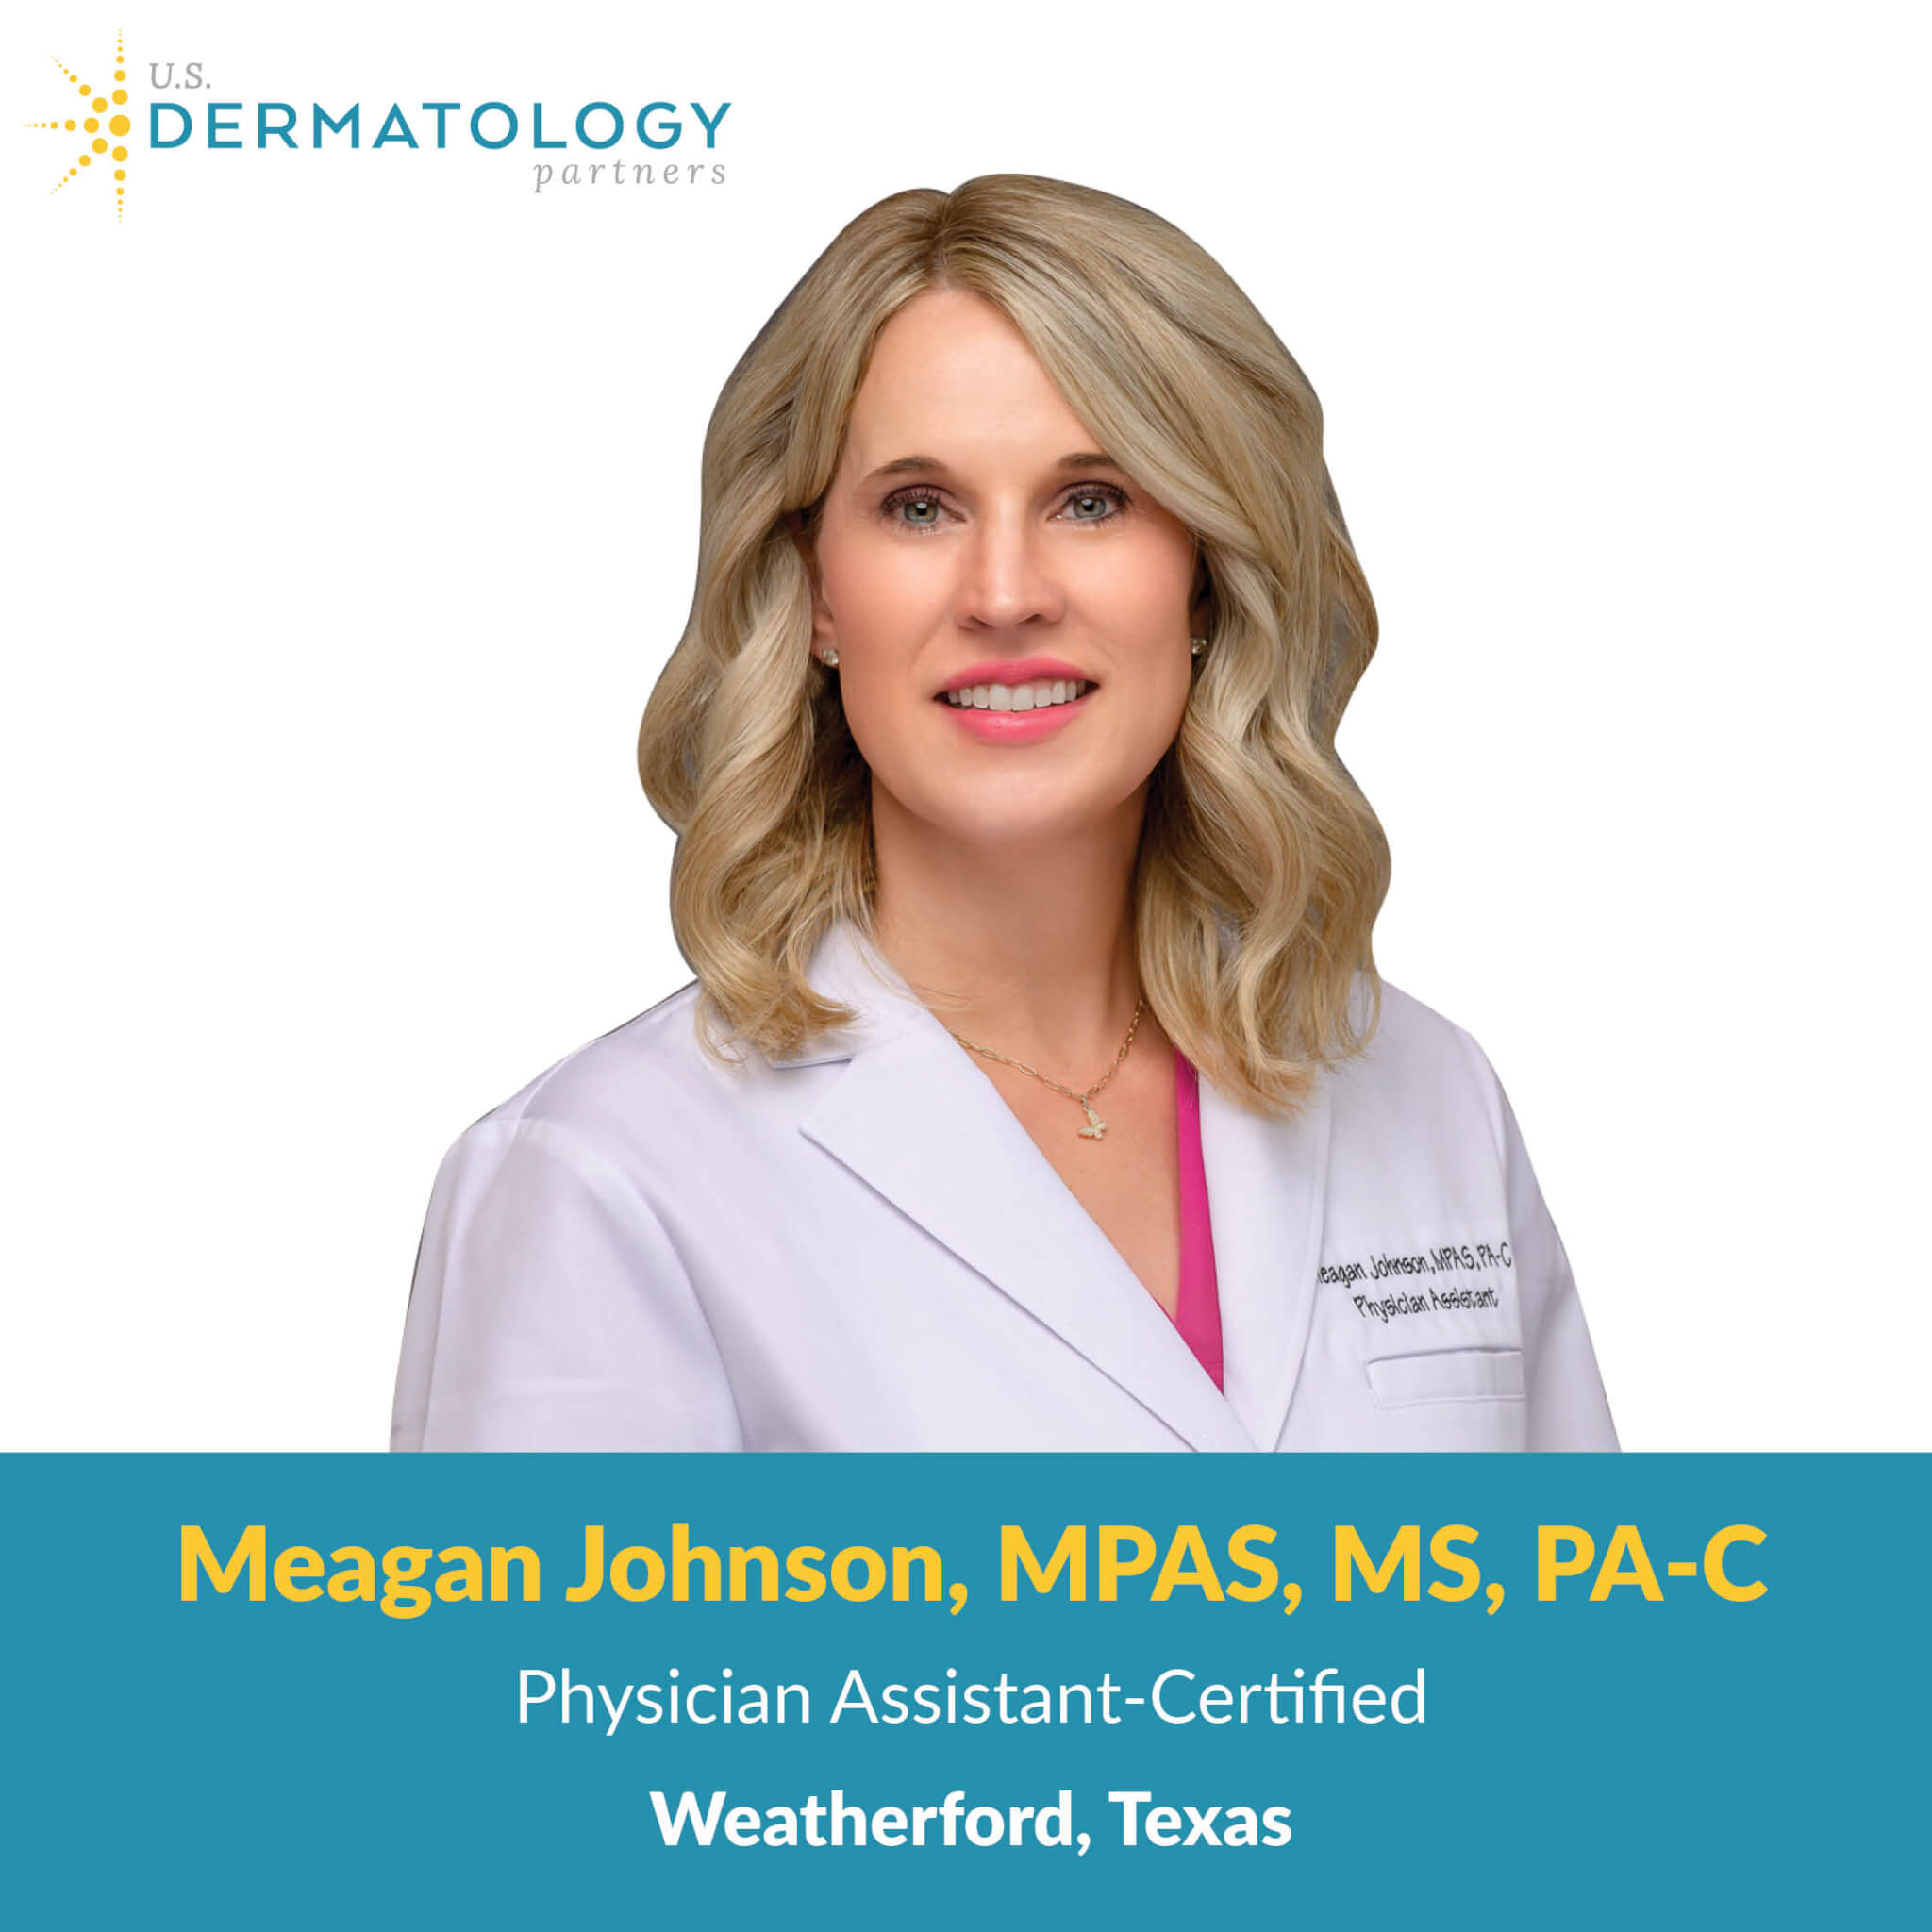 Welcome Meagan Johnson, PA-C to Weatherford, Texas